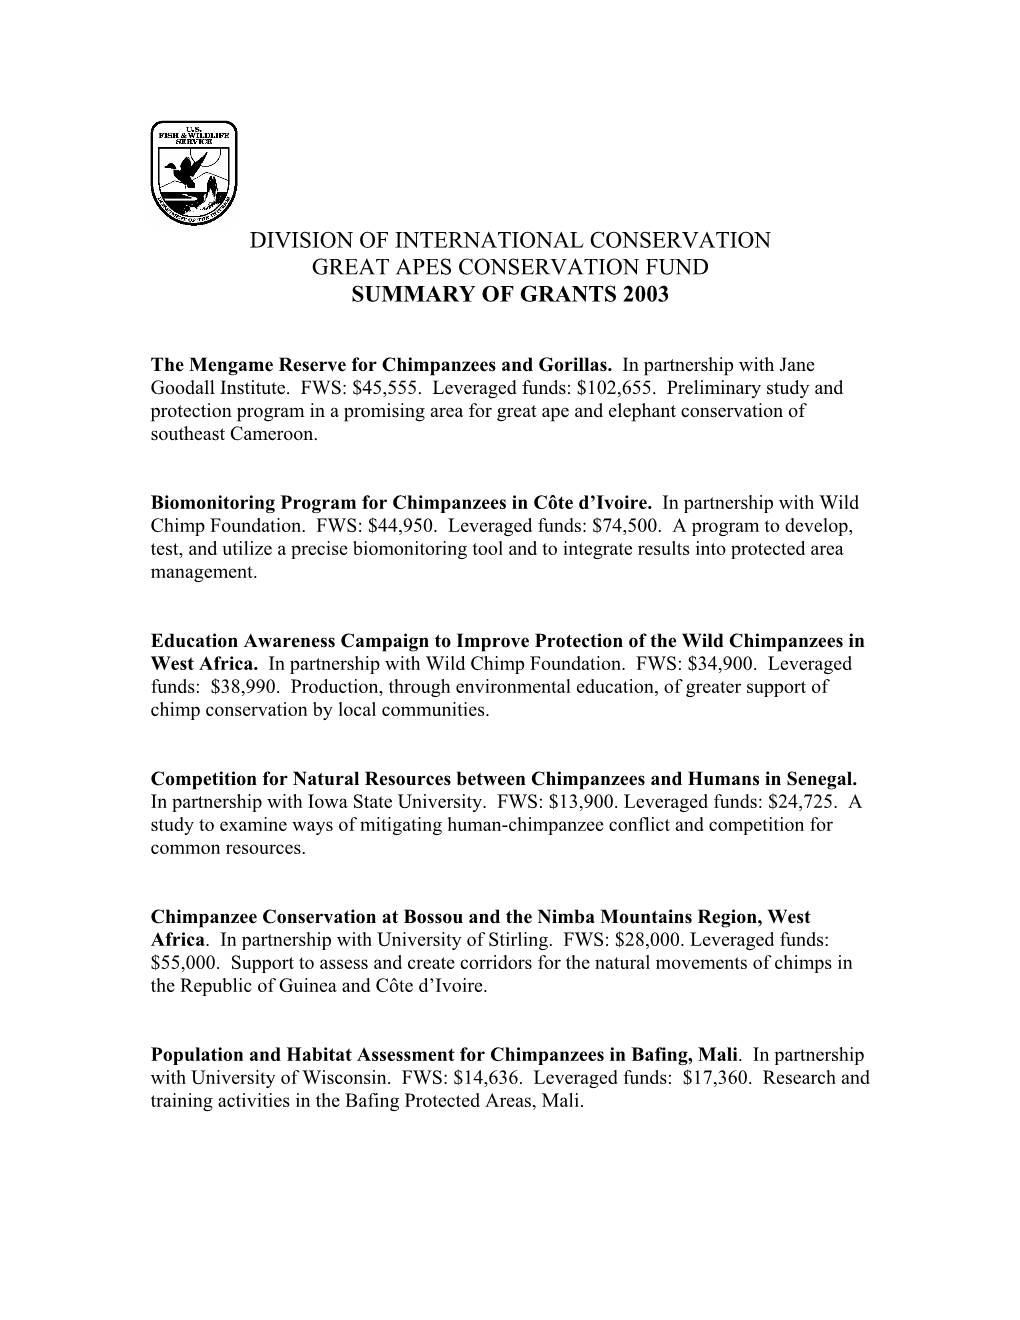 Division of International Conservation Great Apes Conservation Fund Summary of Grants 2003